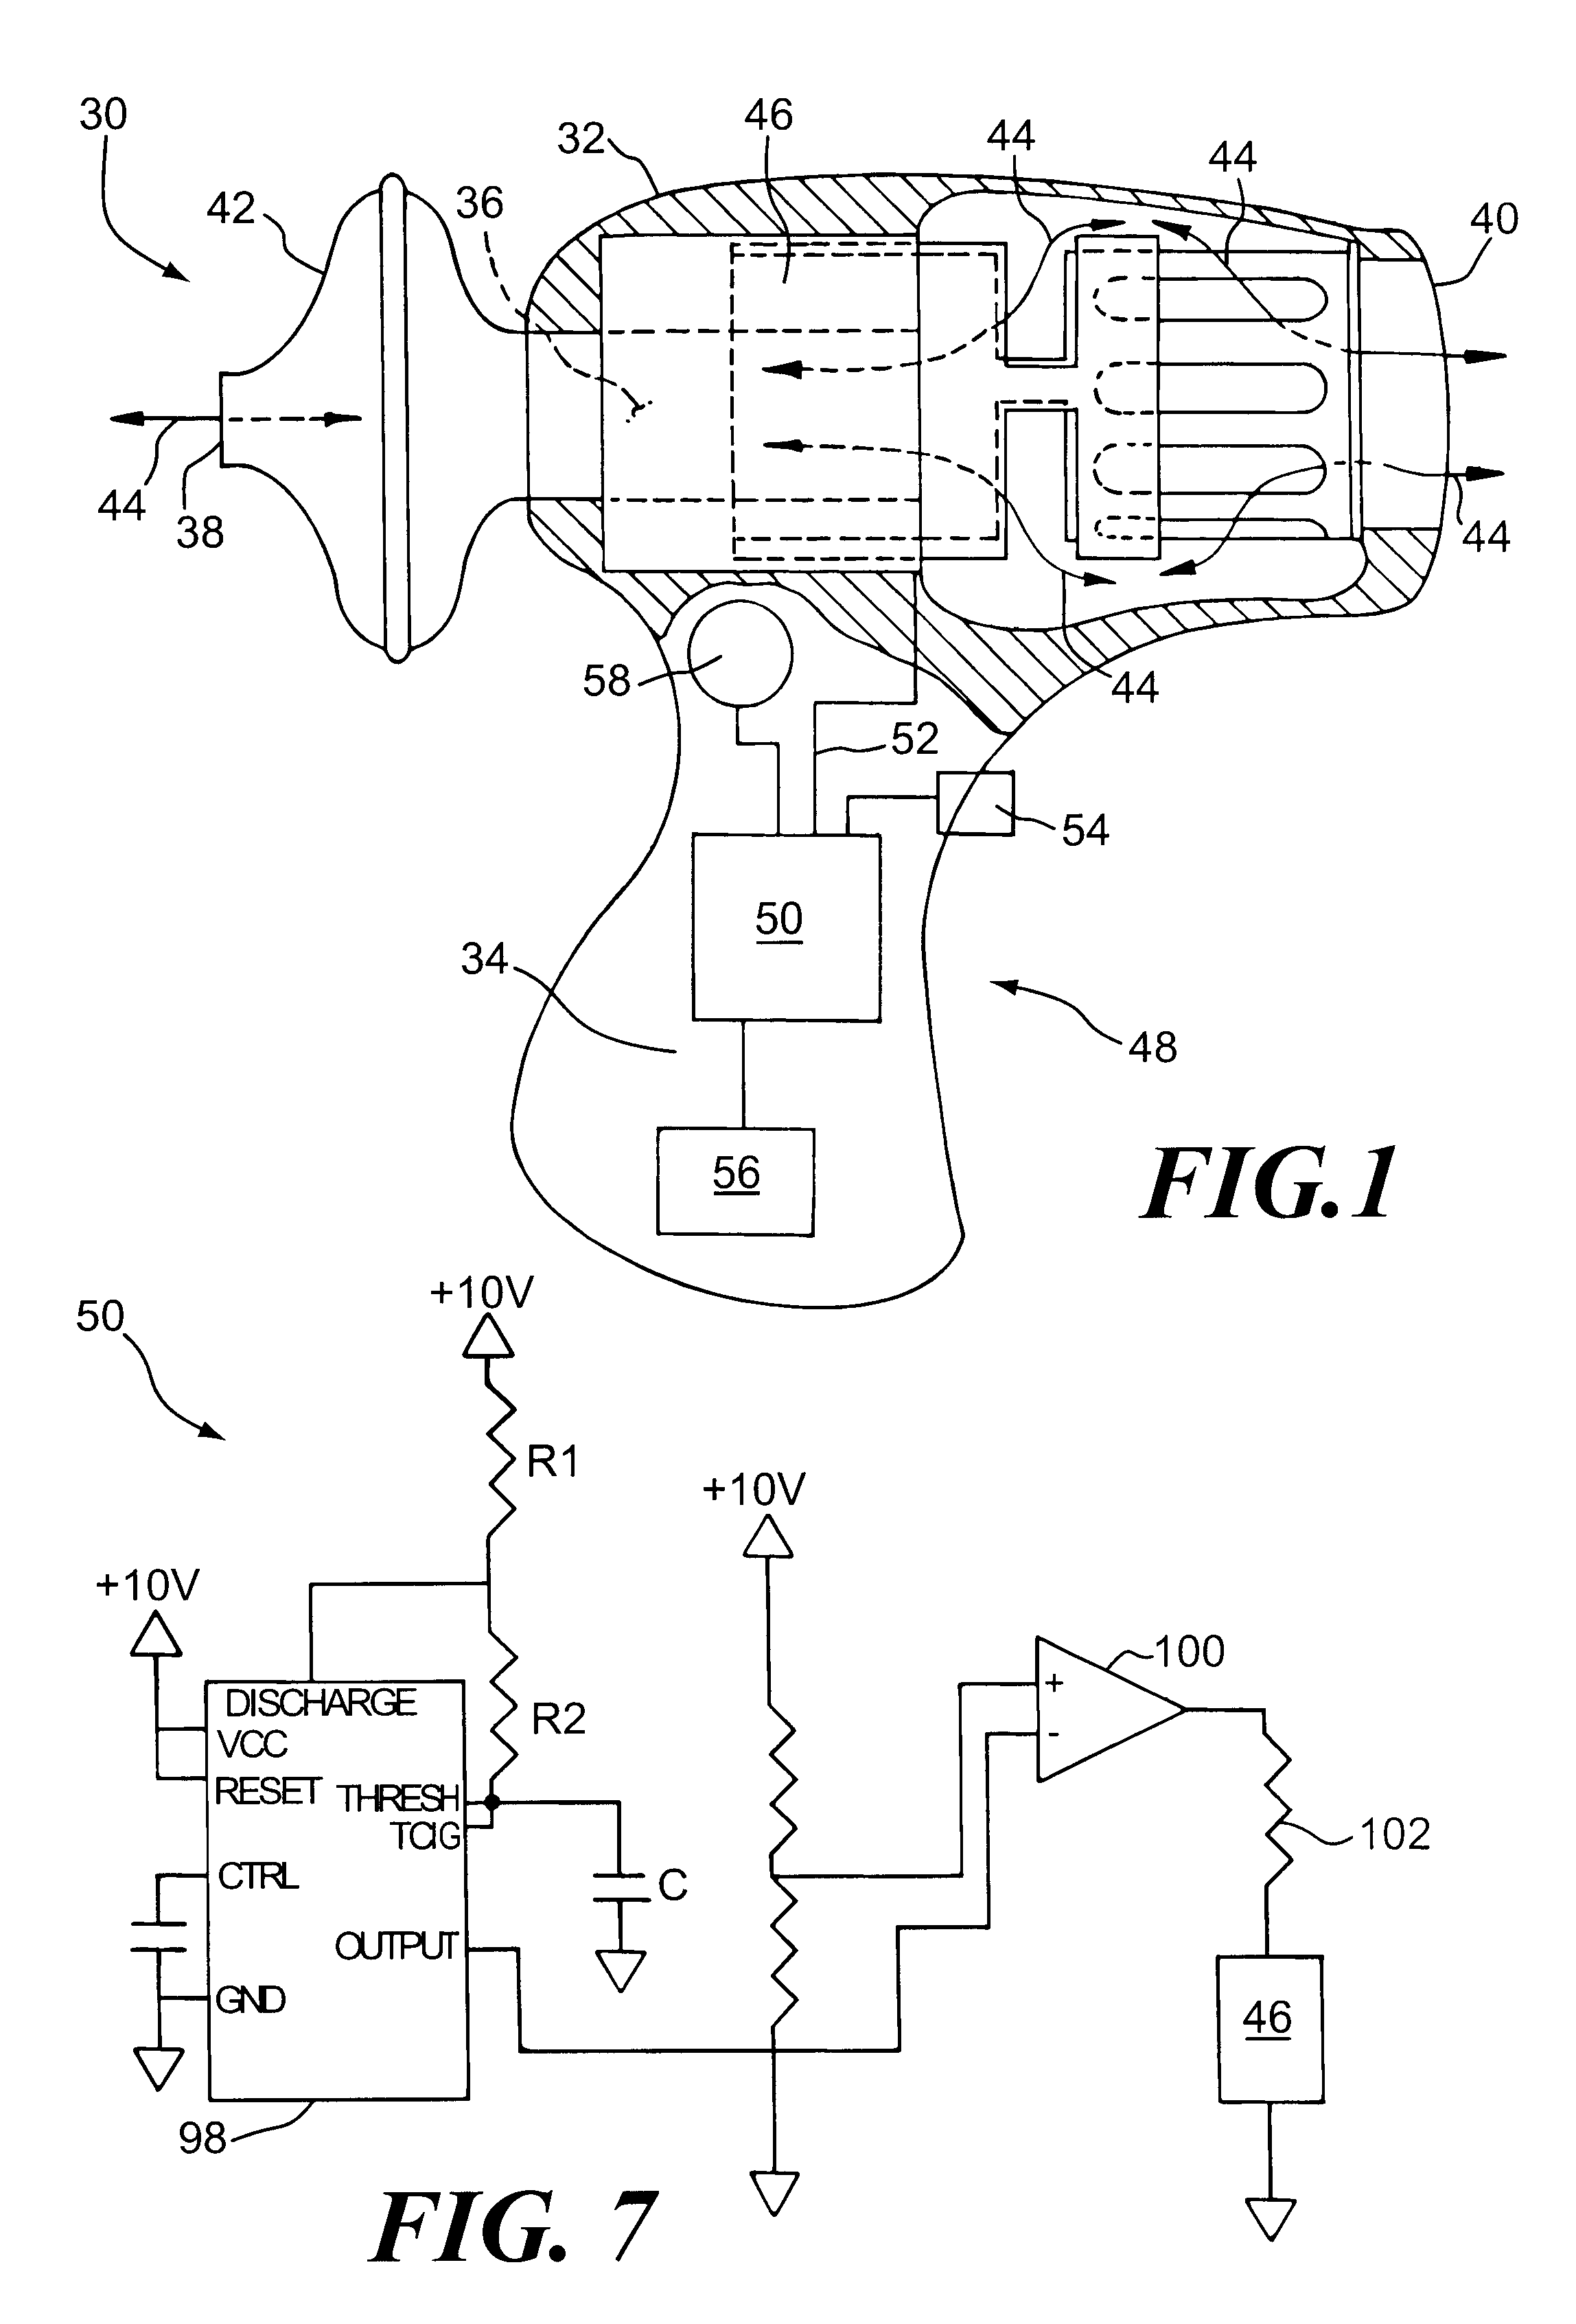 Apparatus and method of providing high frequency variable pressure to a patient